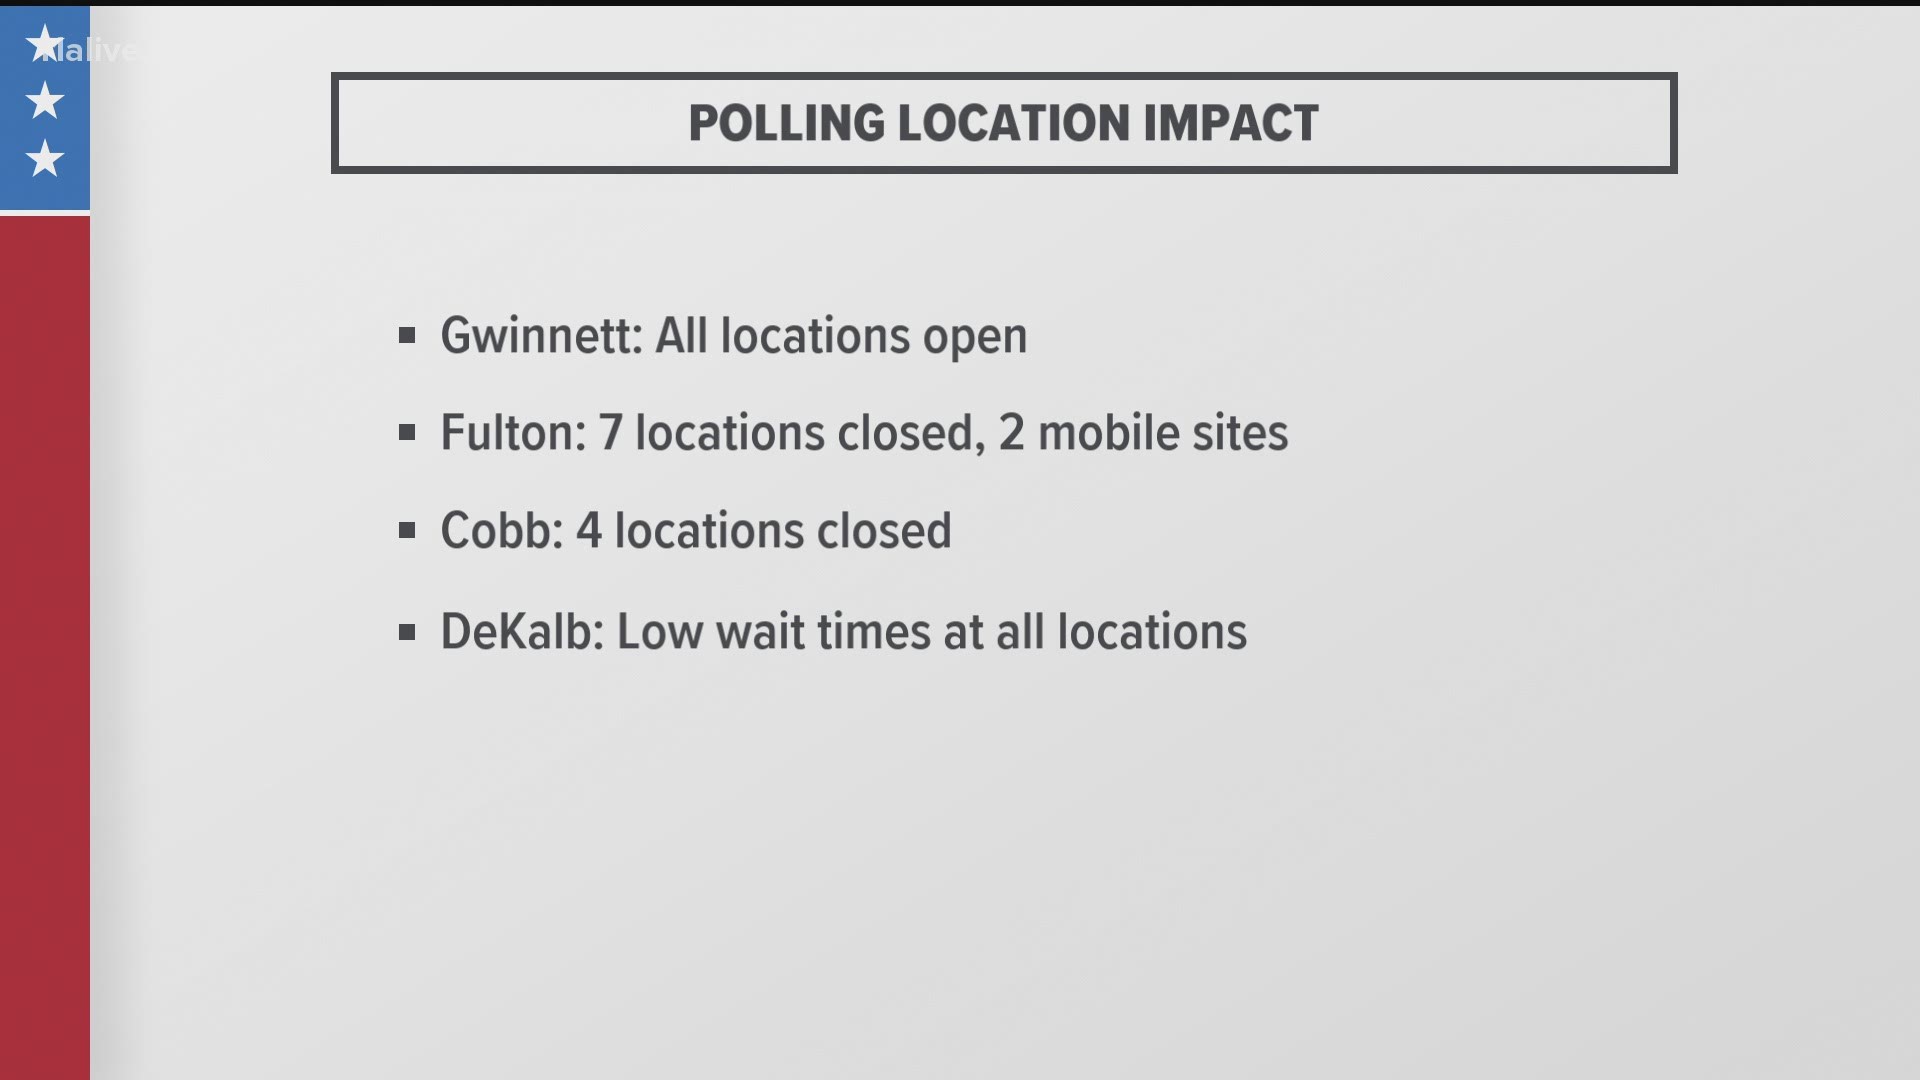 Power outages impacting some voting locating.